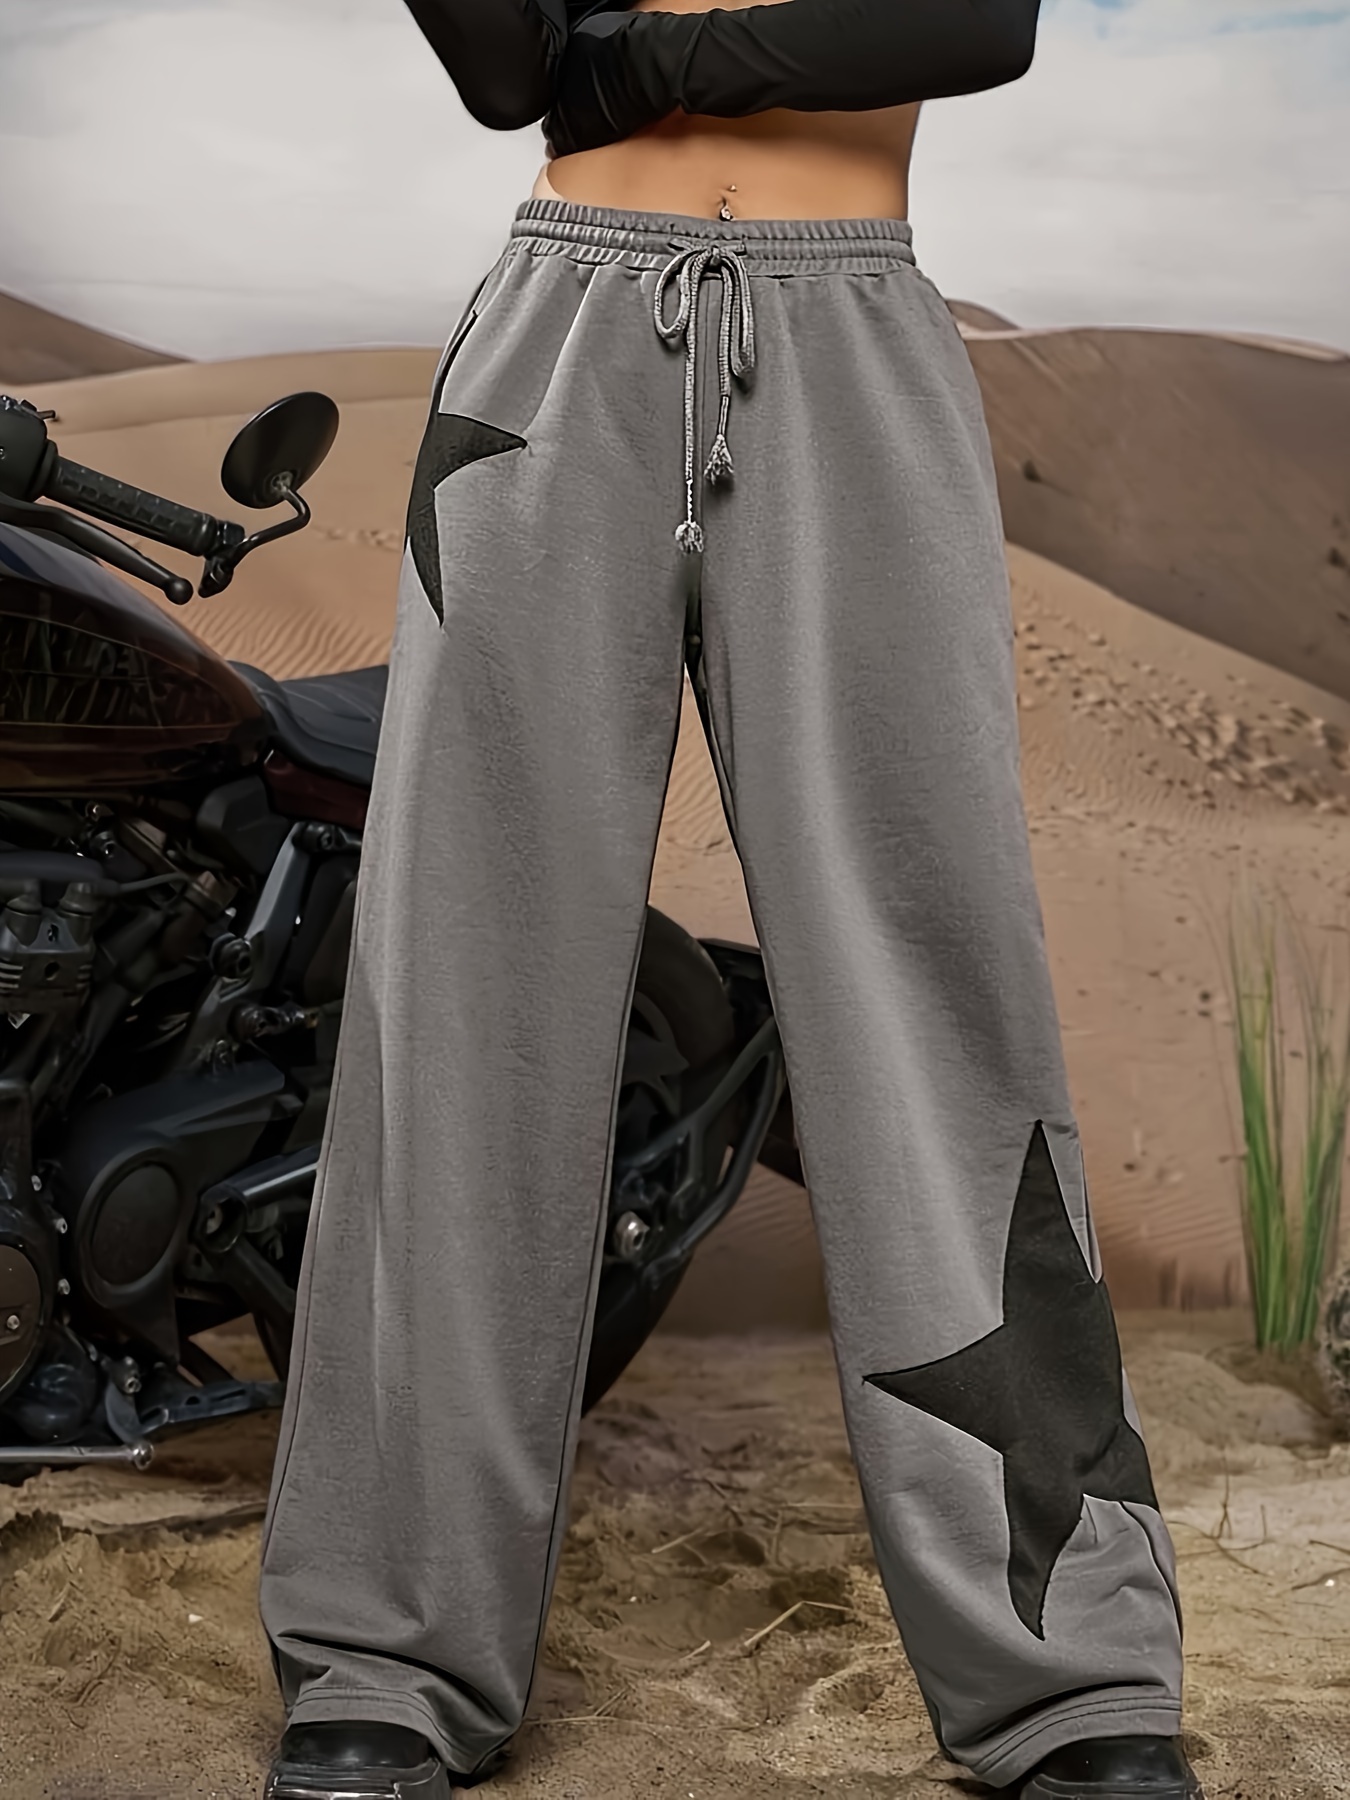 Wide Leg Pants Women's Spring Summer New High Waist Straight Pants  Versatile Loose Casual Mopping Trousers Black Apricot - Pants & Capris -  AliExpress